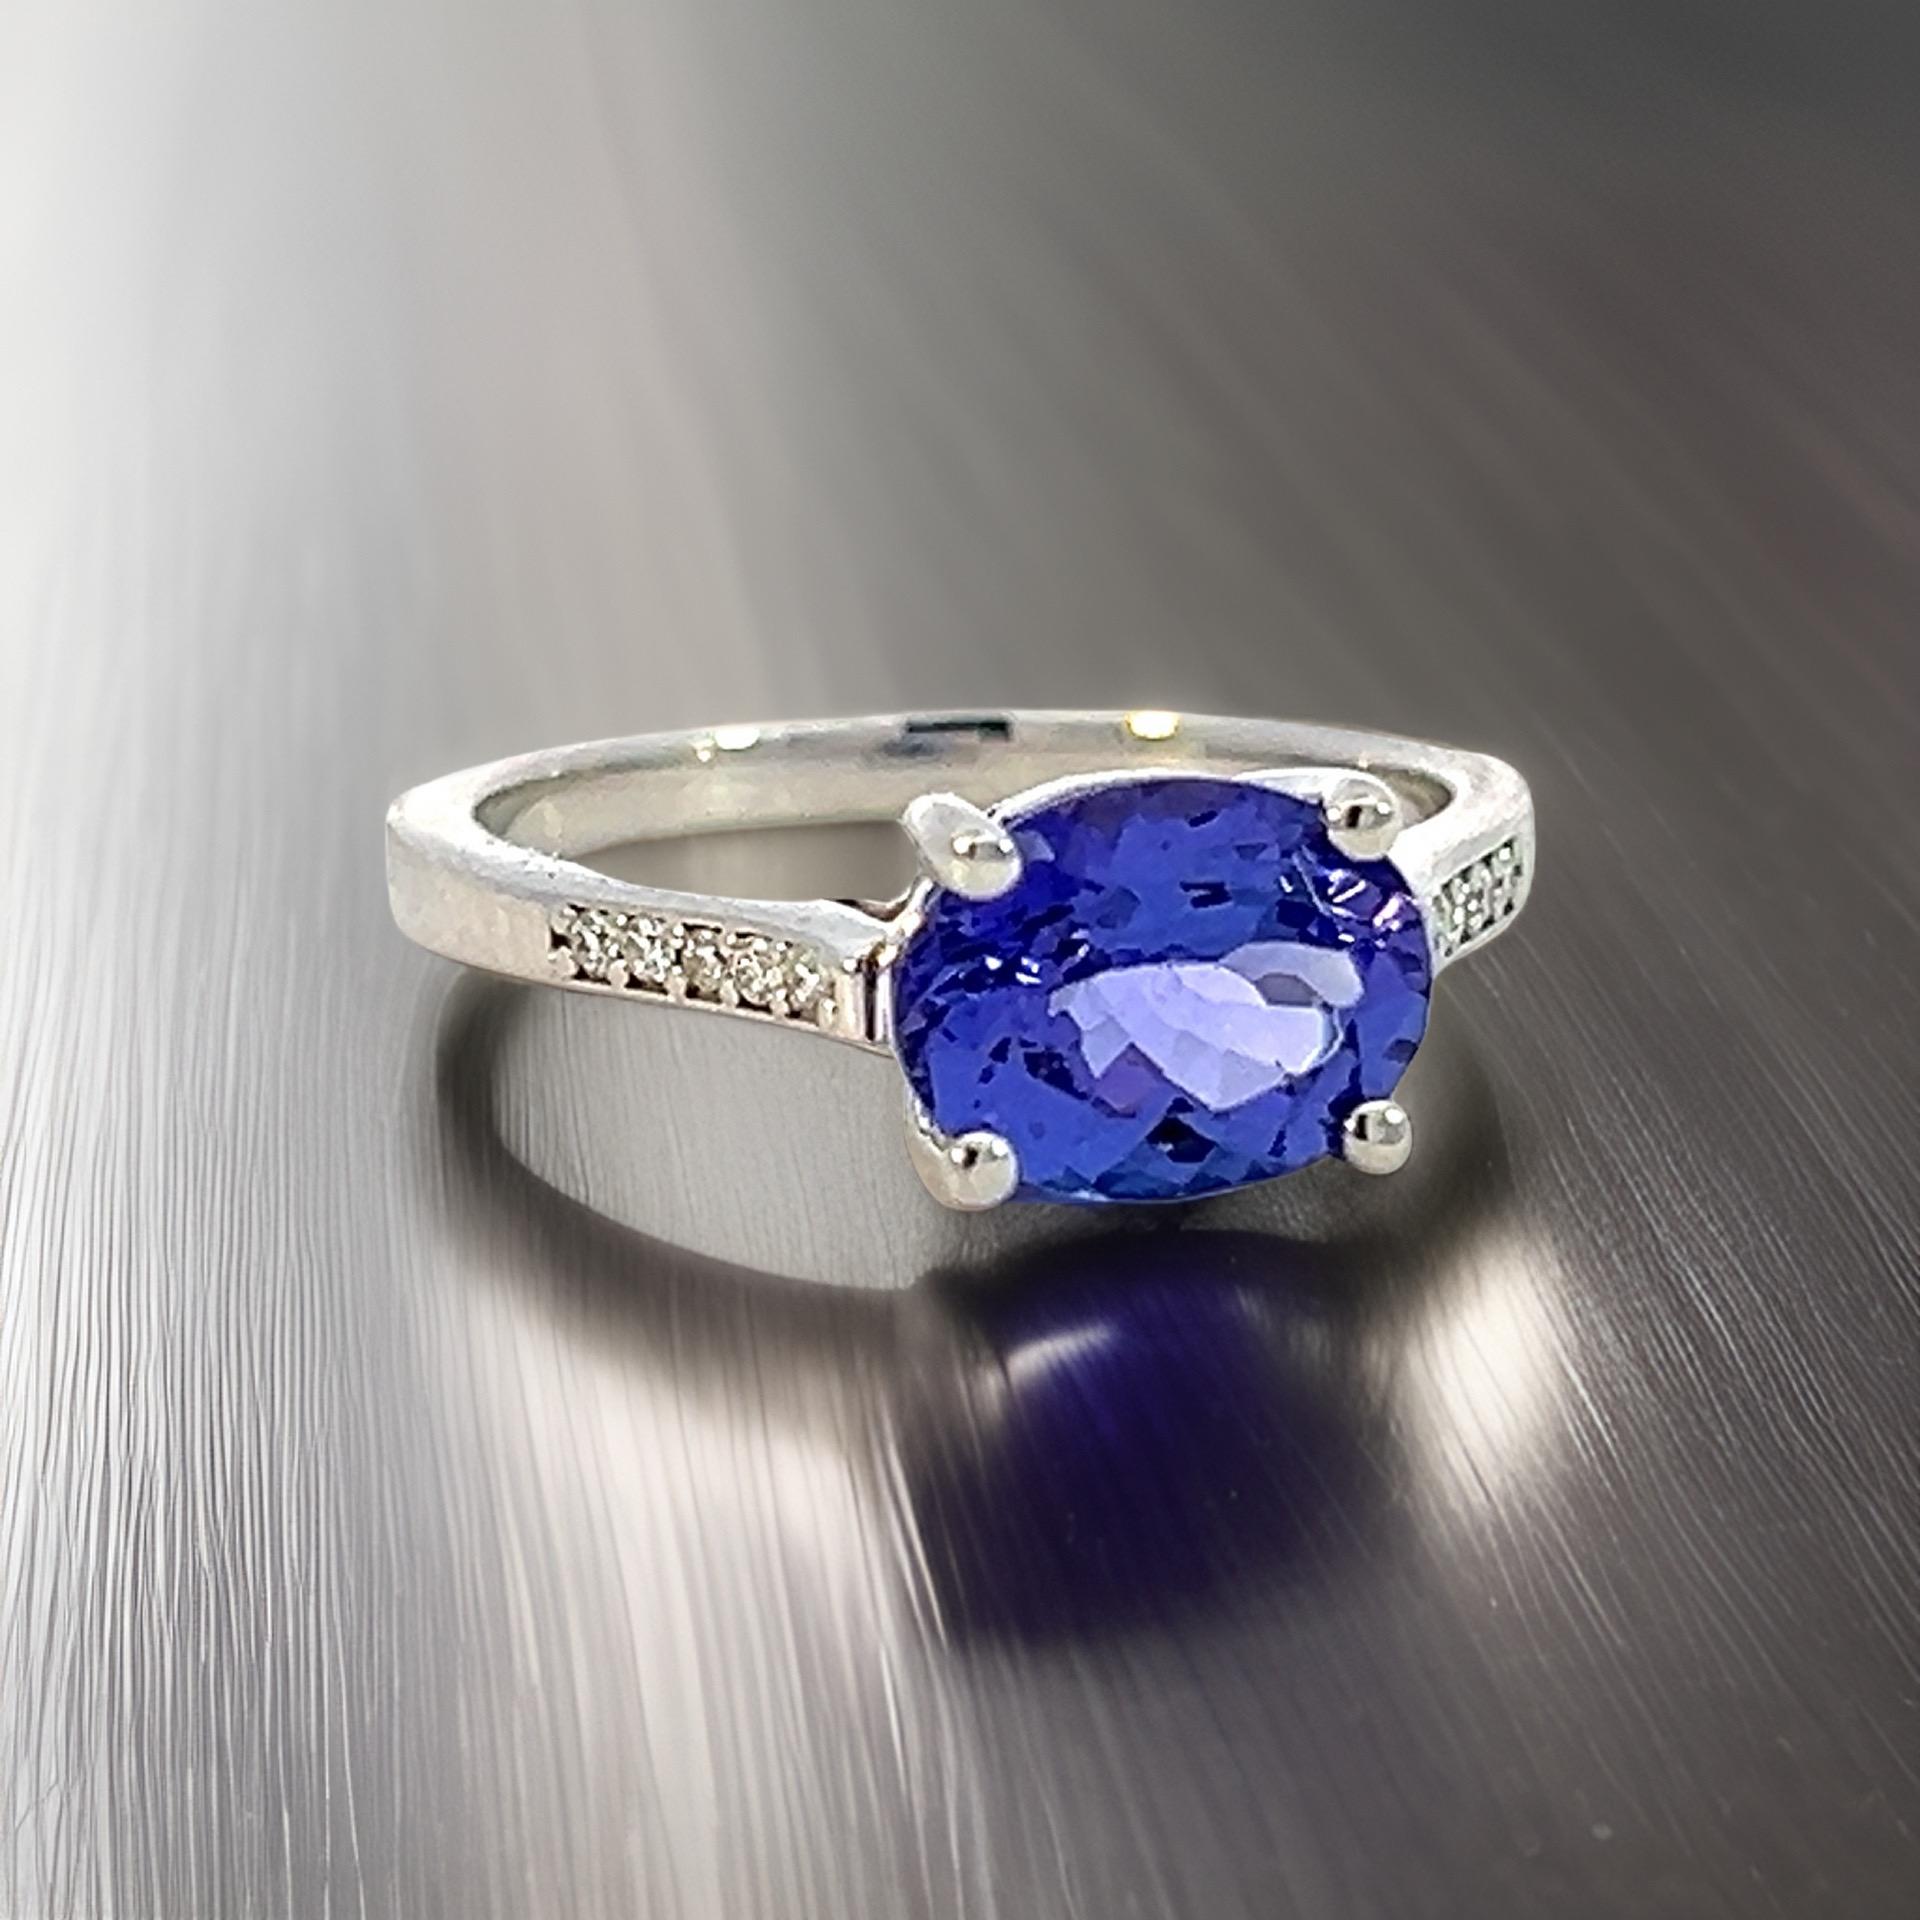 Oval Cut Natural Tanzanite Diamond Ring 6.5 14k WG 2.05 TCW Certified For Sale